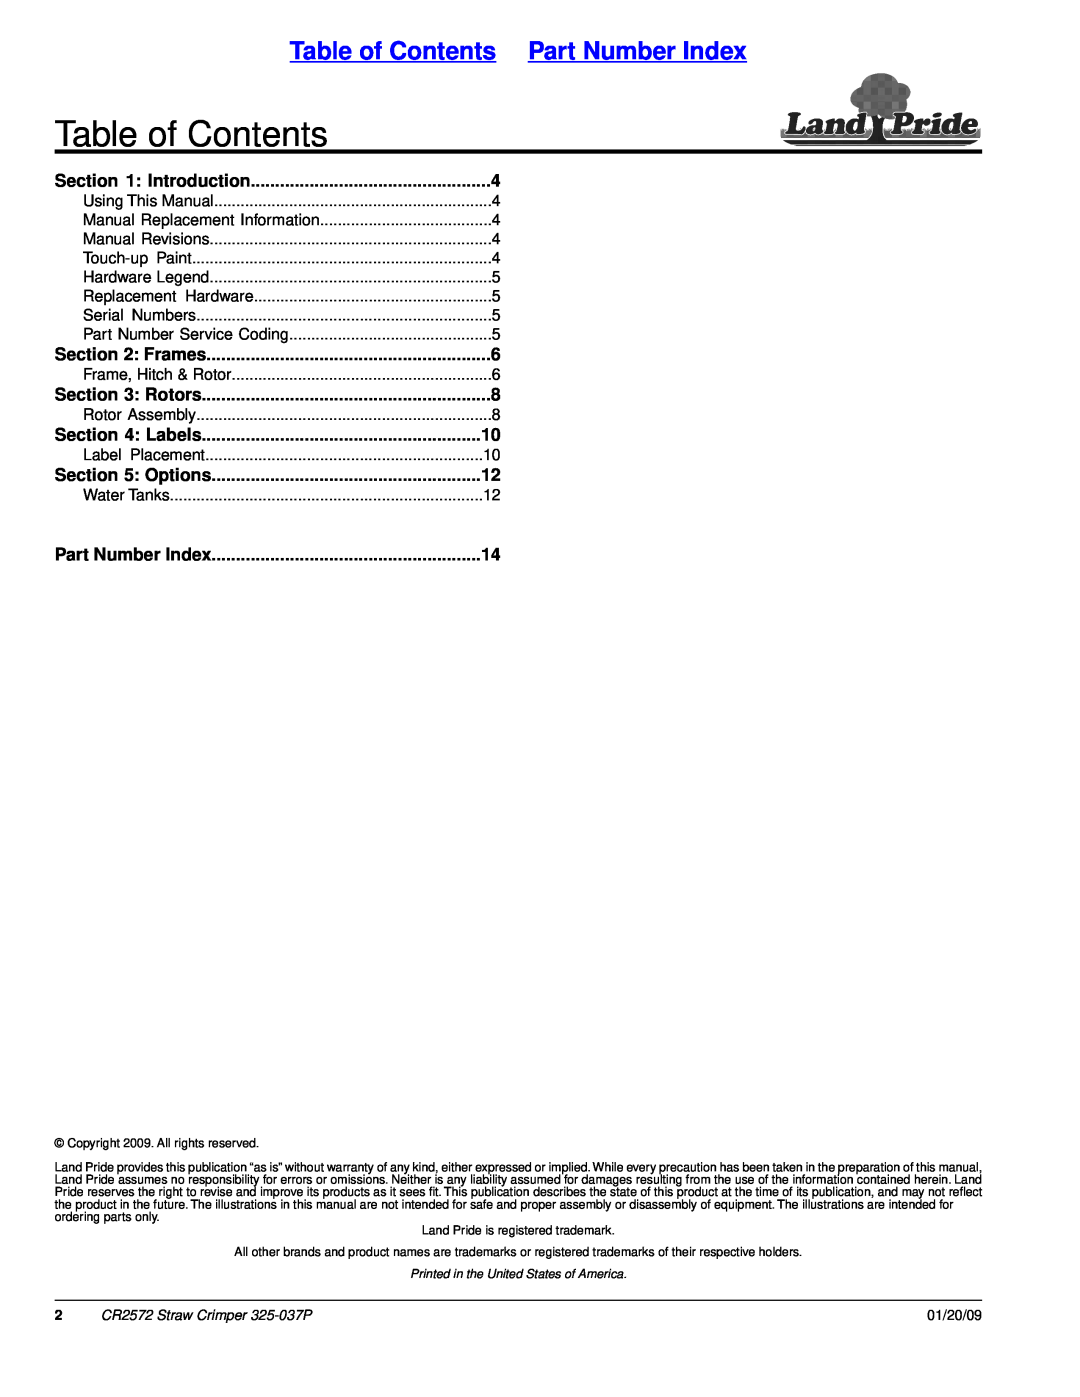 Land Pride CR2572 manual Table of Contents Part Number Index, Introduction, Frames, Rotors, Labels, Options 